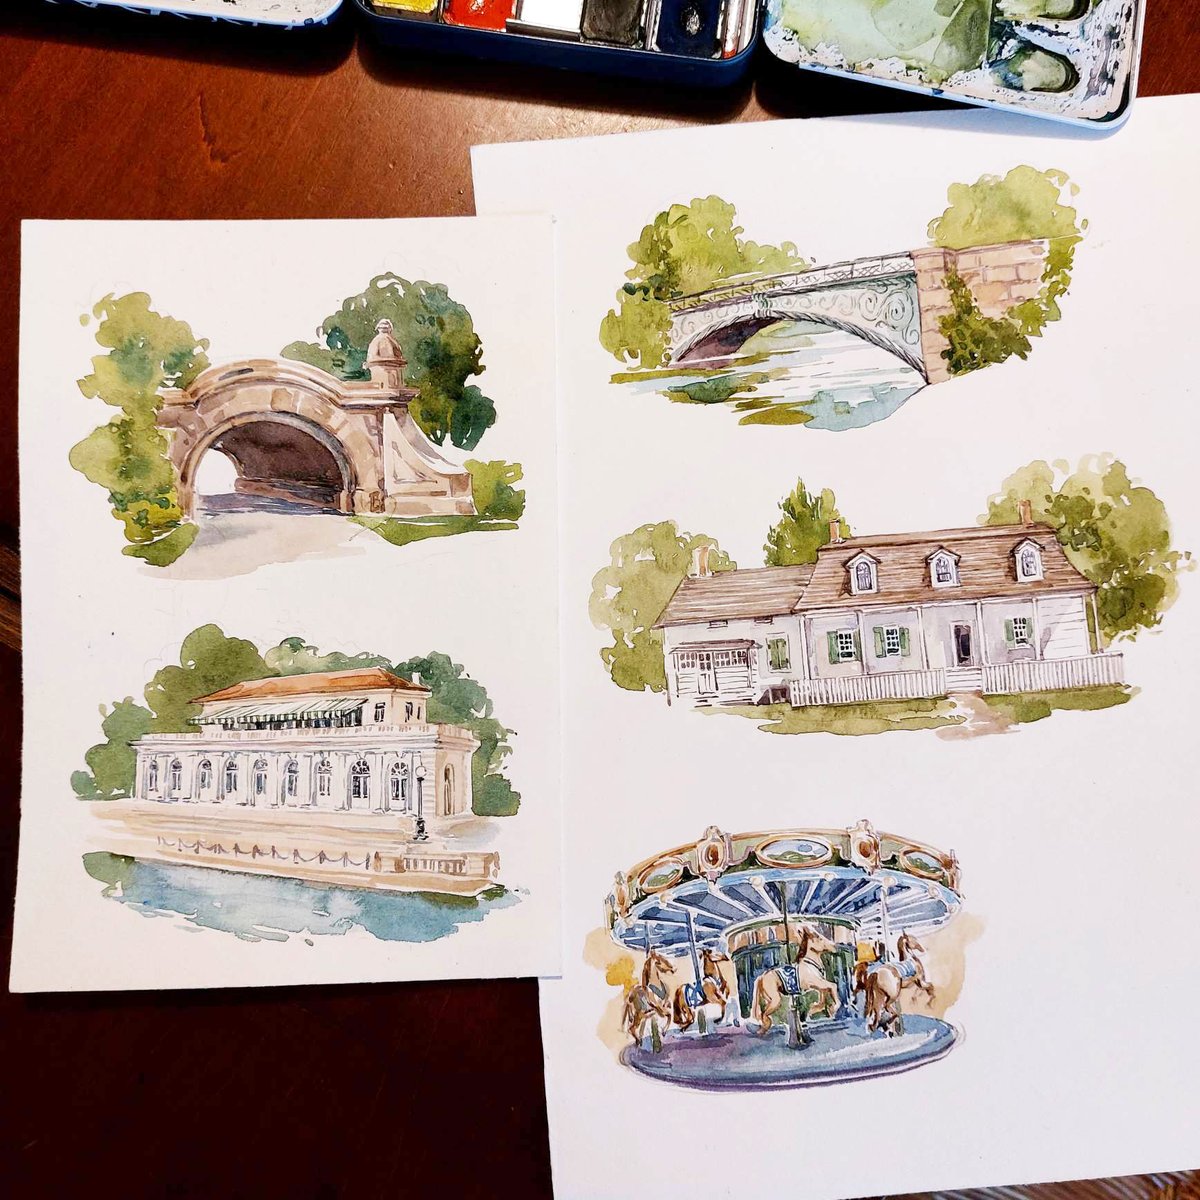 We are working on a map for Prospect Park in Brooklyn. I have a good friend that lives there... whenever I work on a project, I think of him. Maps are like jigsaw puzzles.. these are some of the pieces. 
#seahorsebendpress #bespokedesign #watercolor #fineart